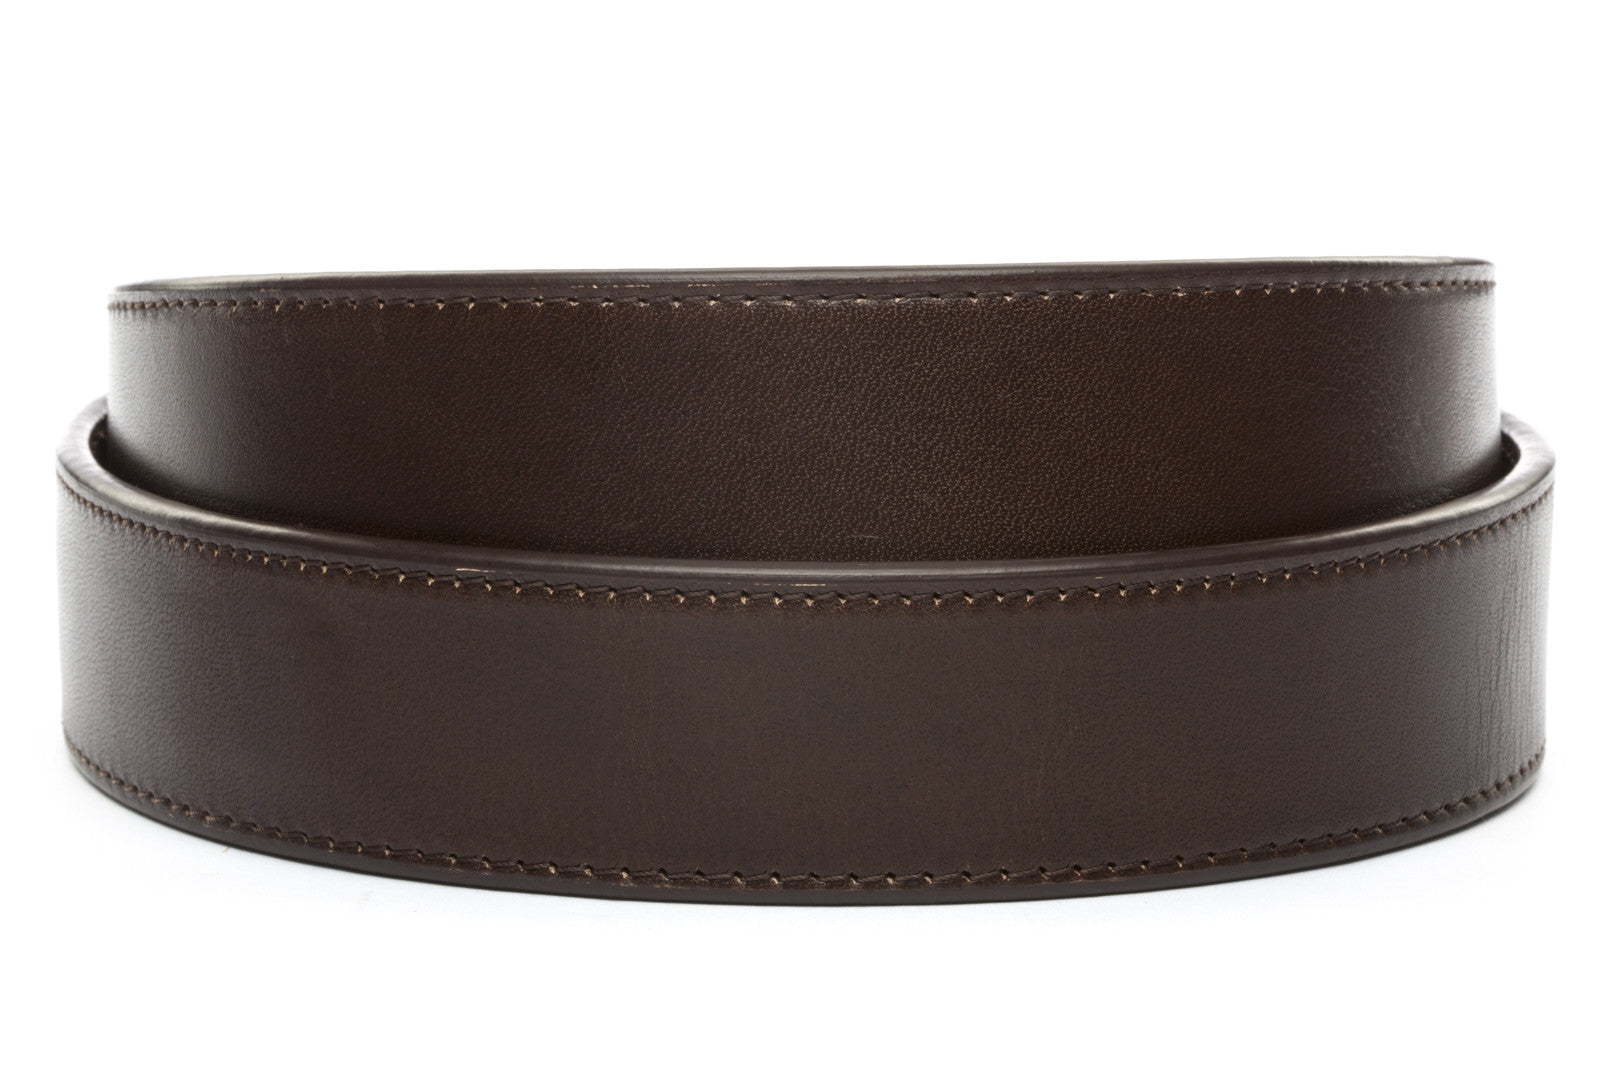 Men's leather belt strap in espresso vegetable tanned, 1.5 inches wide, formal look